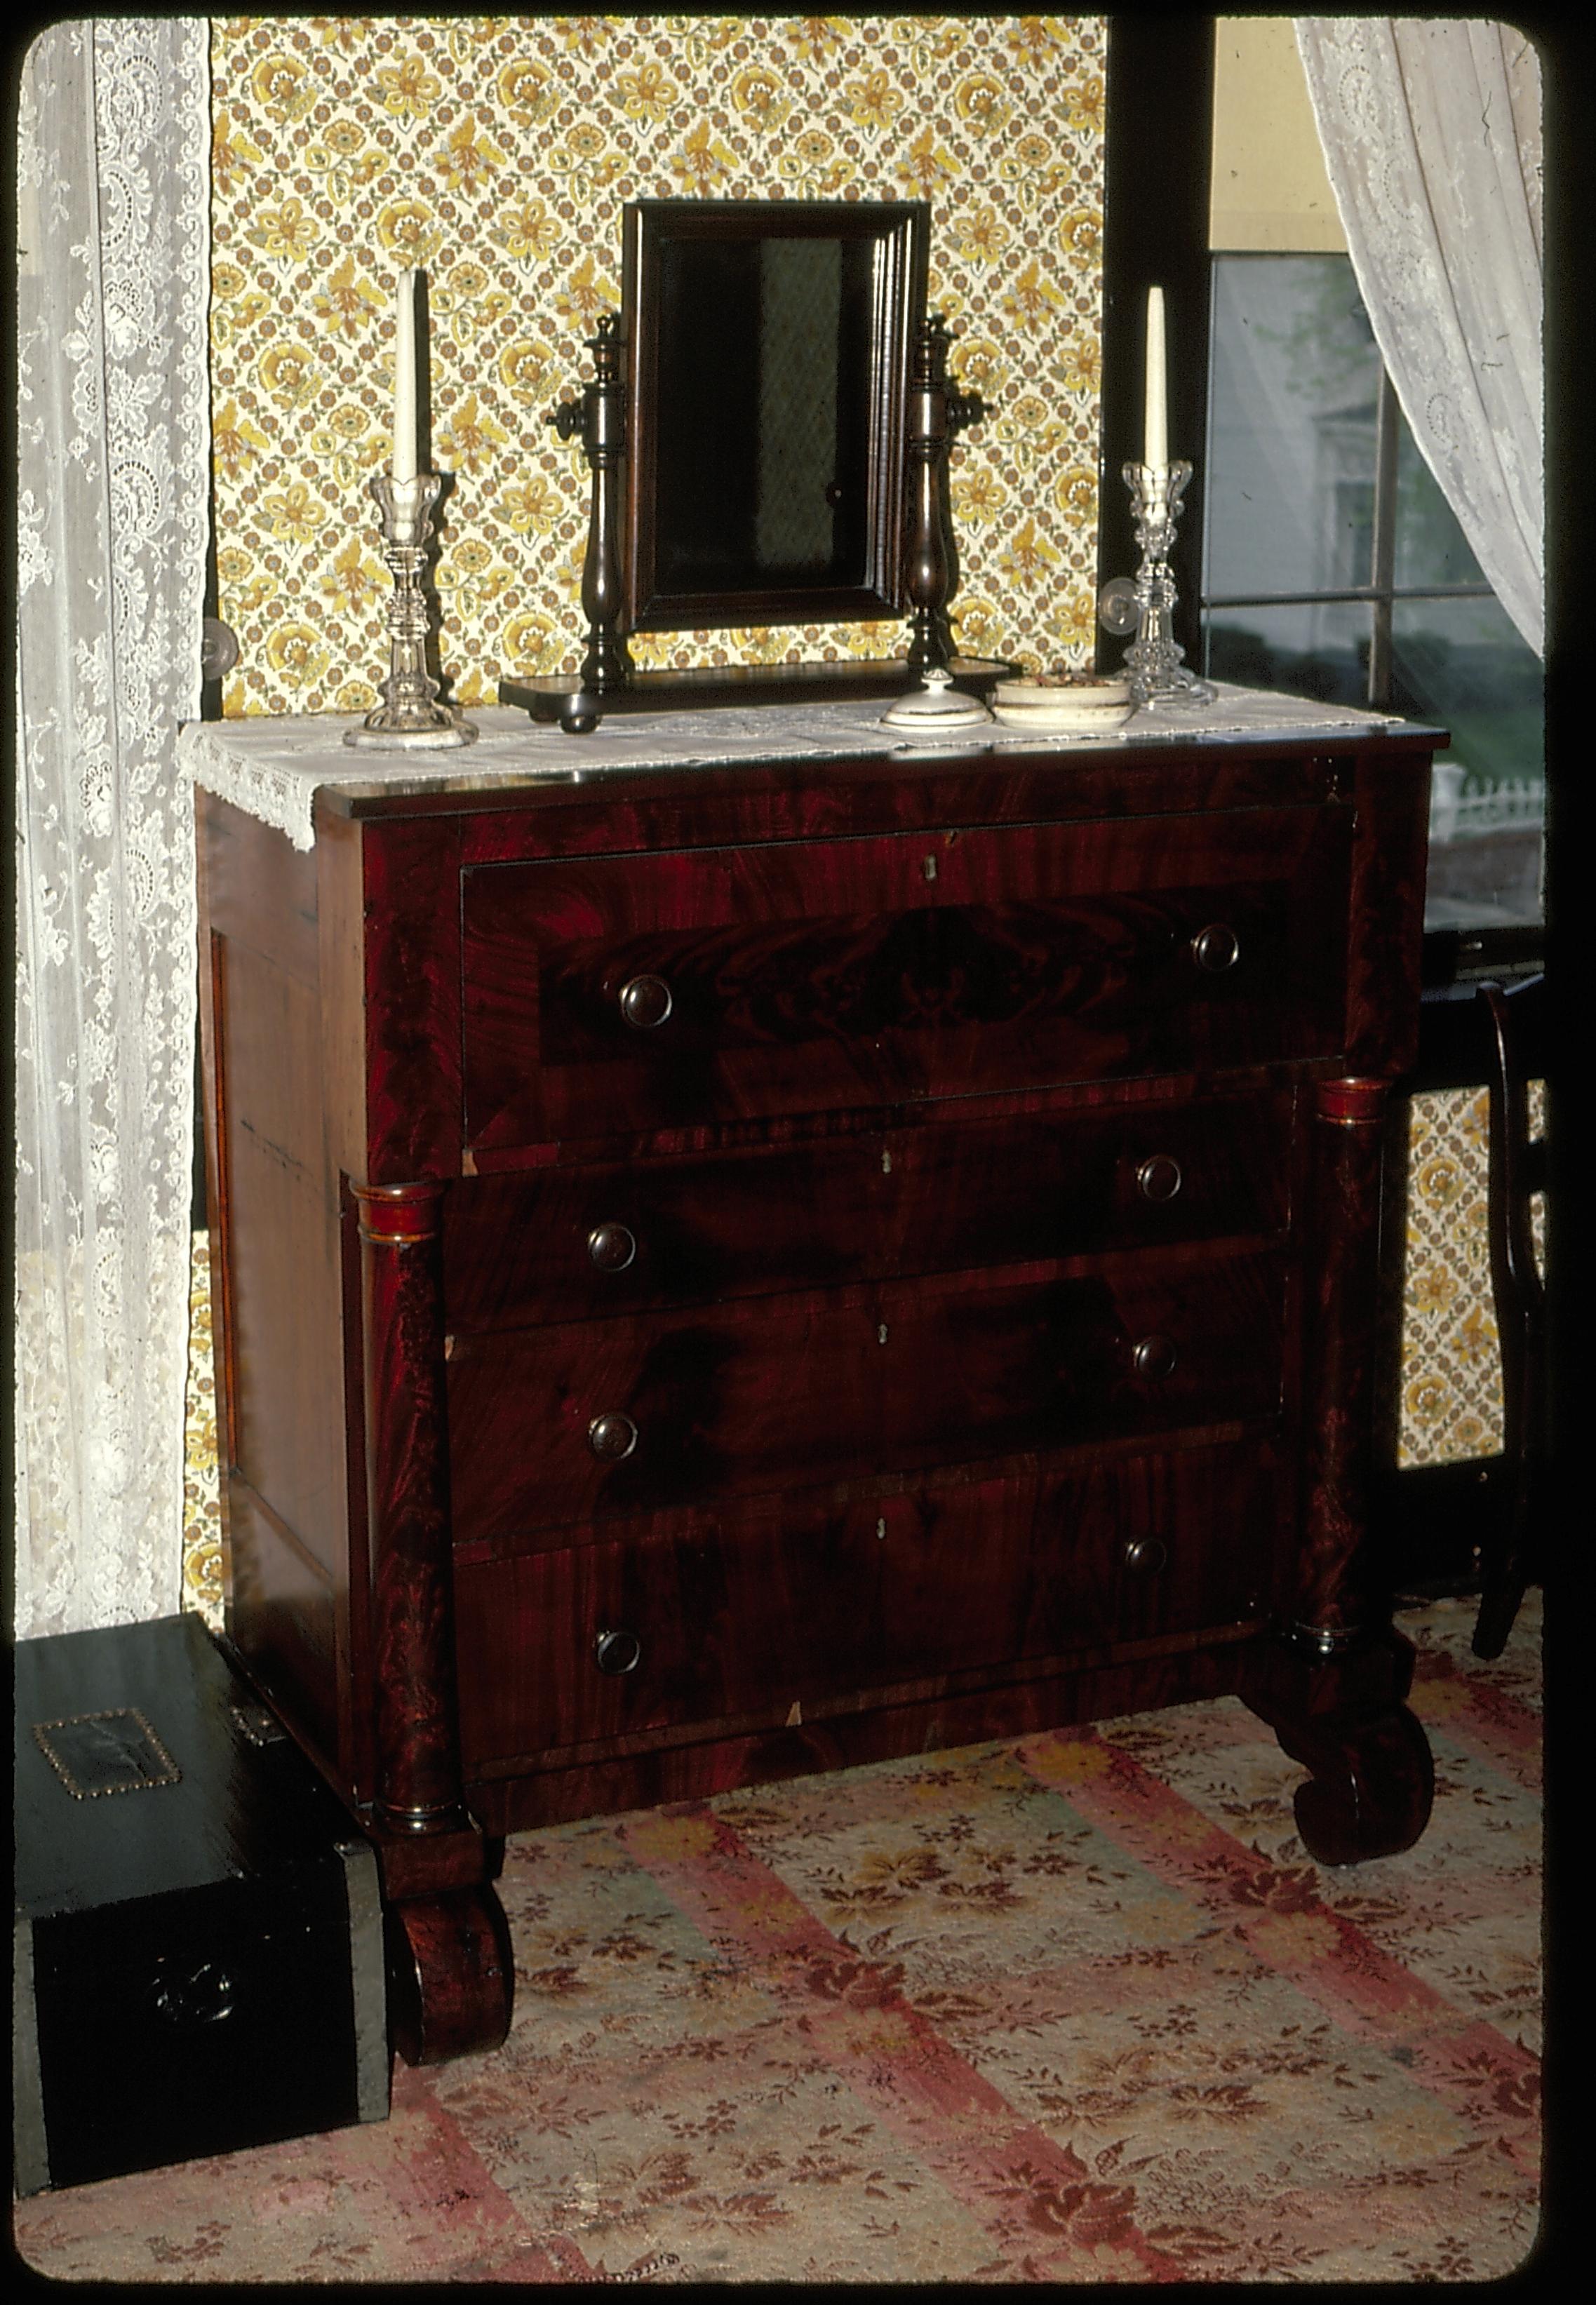 NA 3D.4, 207 Lincoln, Home, Boy's, Guest, Room, chest, drawers, candles, mirror